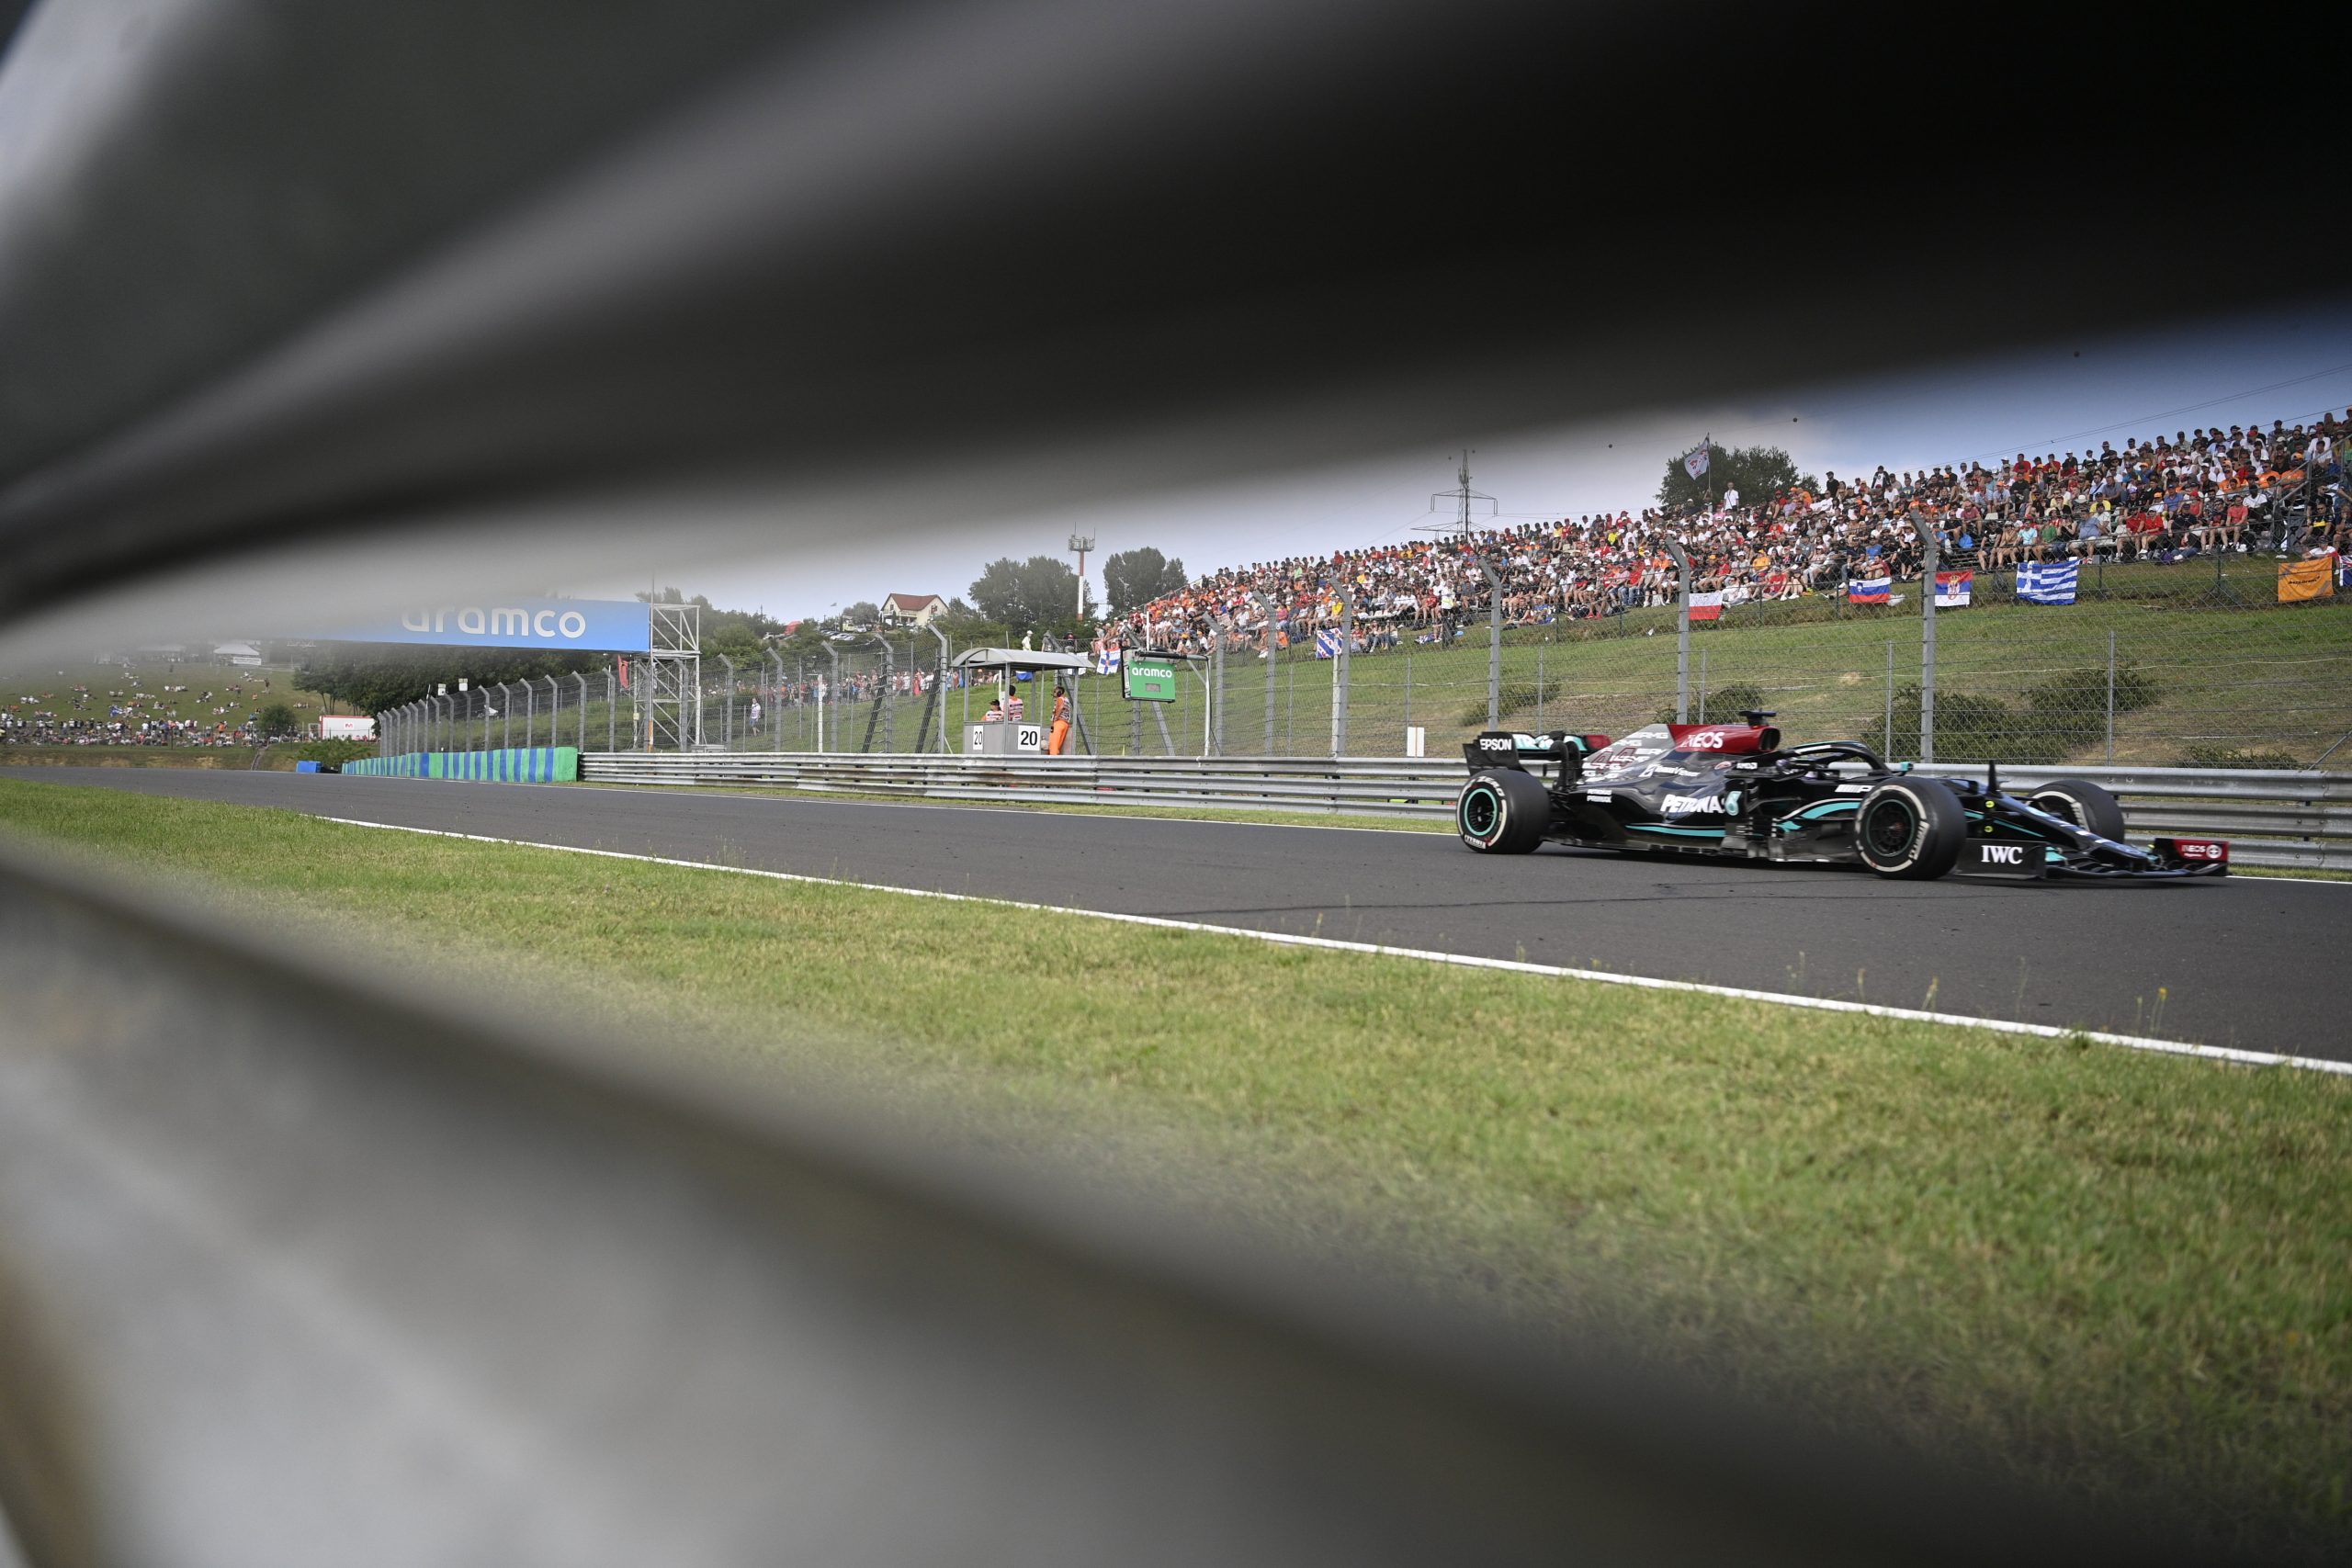 This Years F1 Race at Hungaroring Could Break Attendance Records